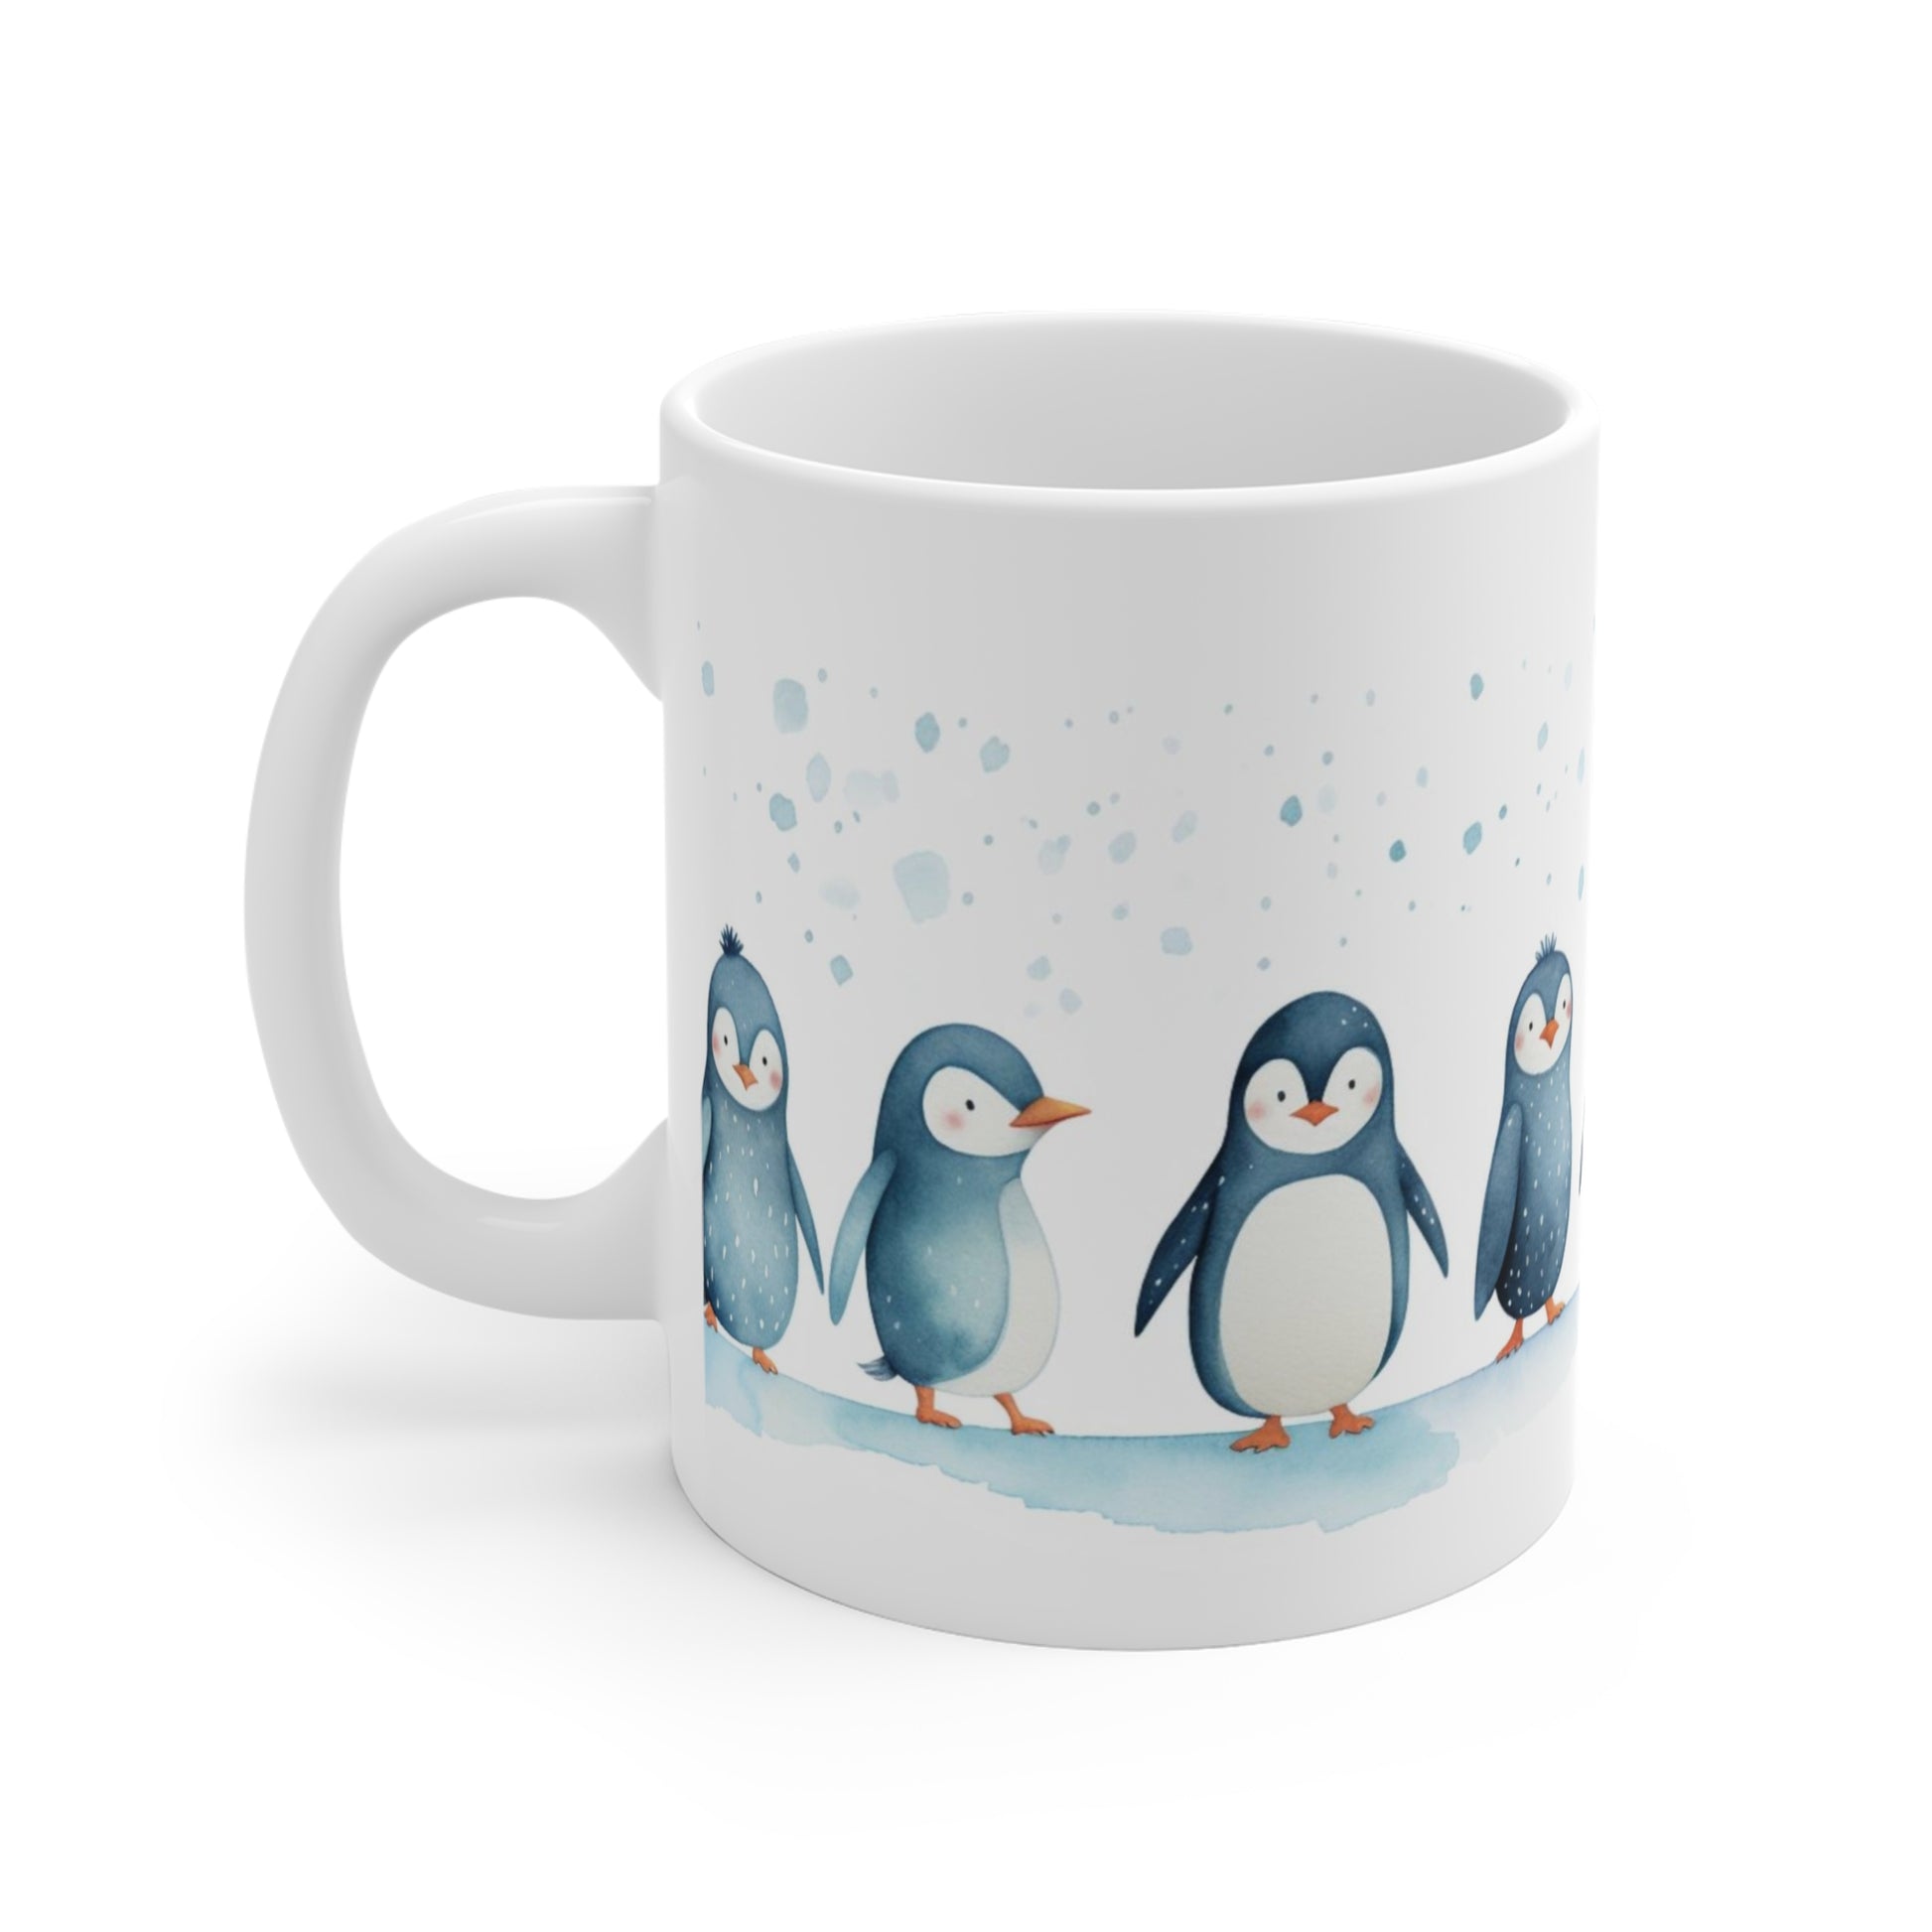 Cute Penguins Coffee Mug, Watercolor Art Ceramic Cup Tea Hot Chocolate Lover Unique Microwave Safe Novelty Cool Gift Starcove Fashion